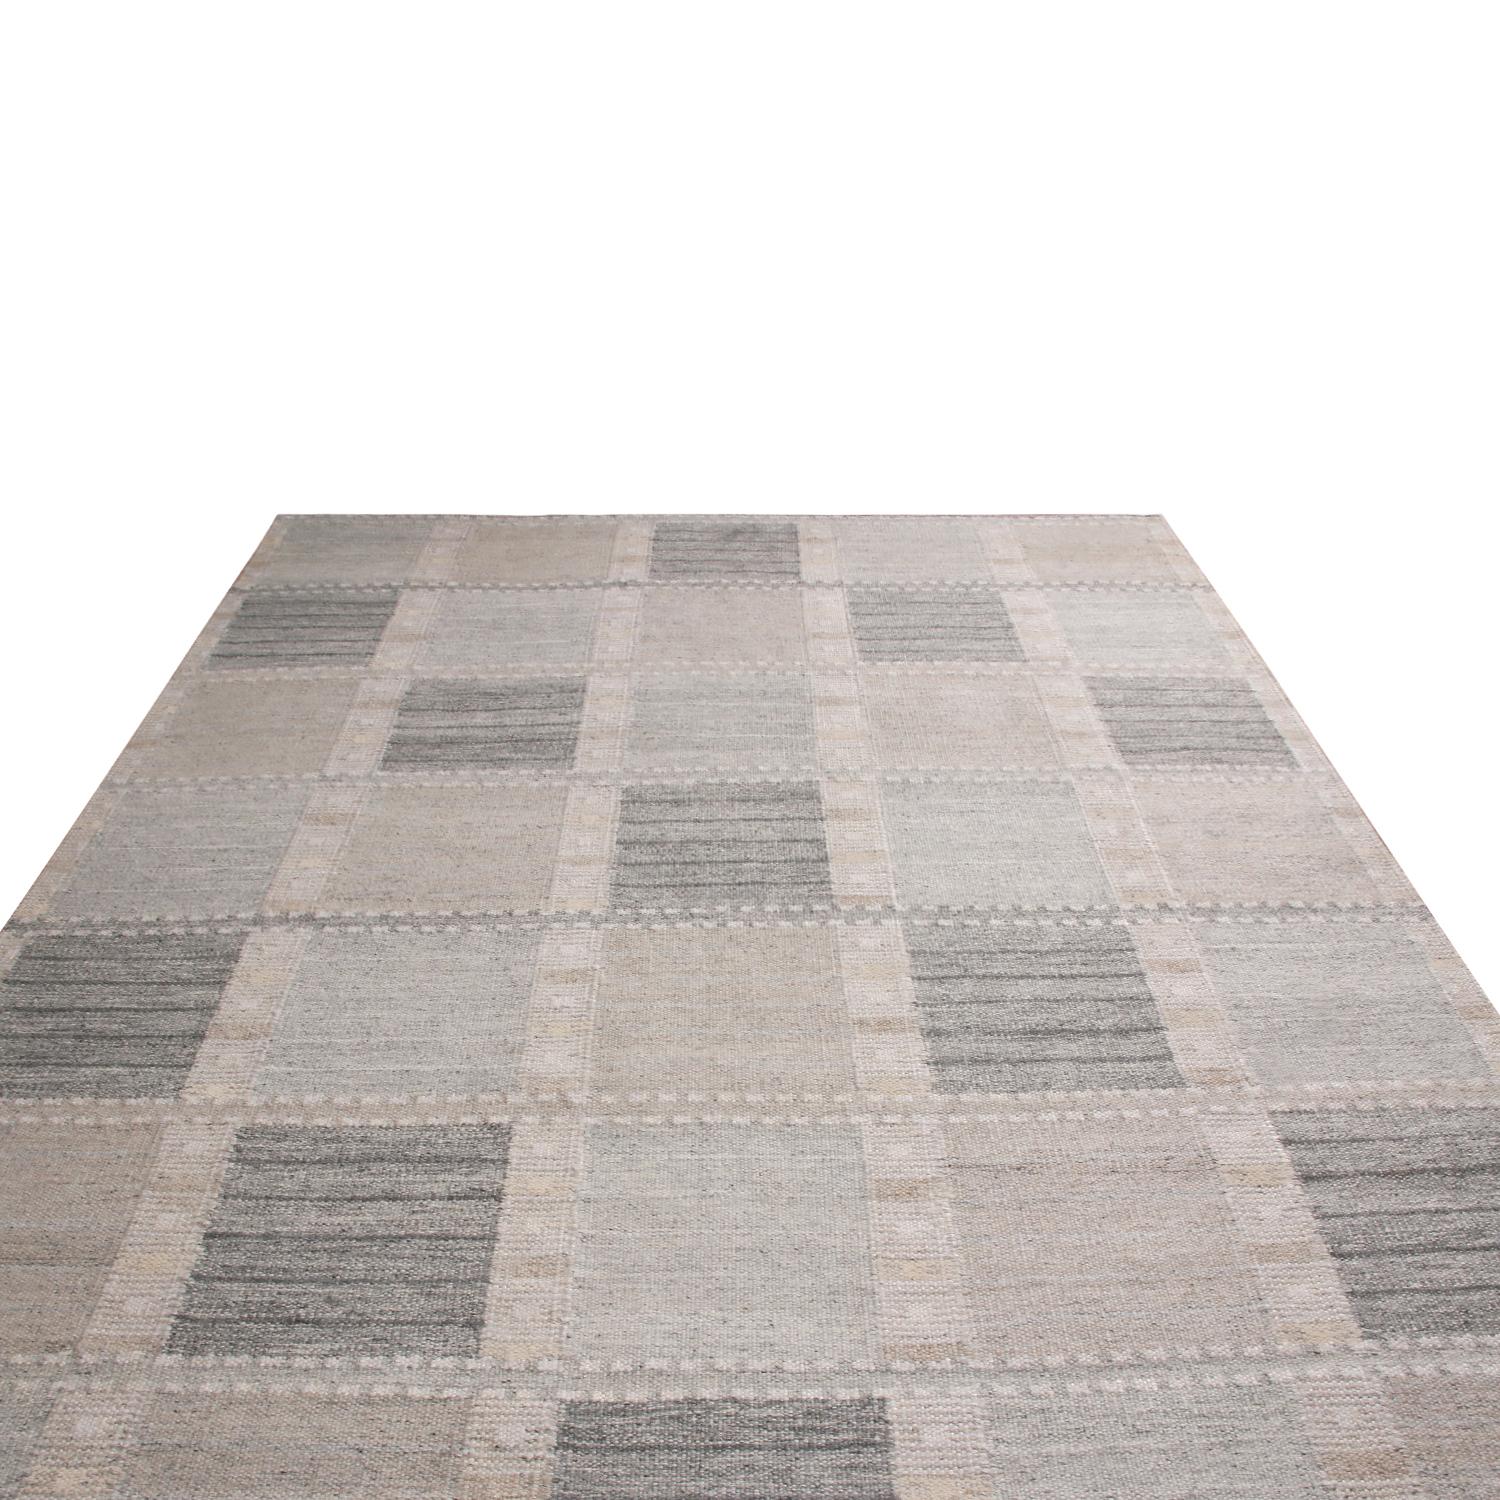 Originating from India, this hand knotted wool pile rug hails from Rug & Kilim’s Scandinavian collection, patchwork-inspired geometric all-over field design with off-white, gray and multi-tonal blue colorways bound in natural yarn, available in full